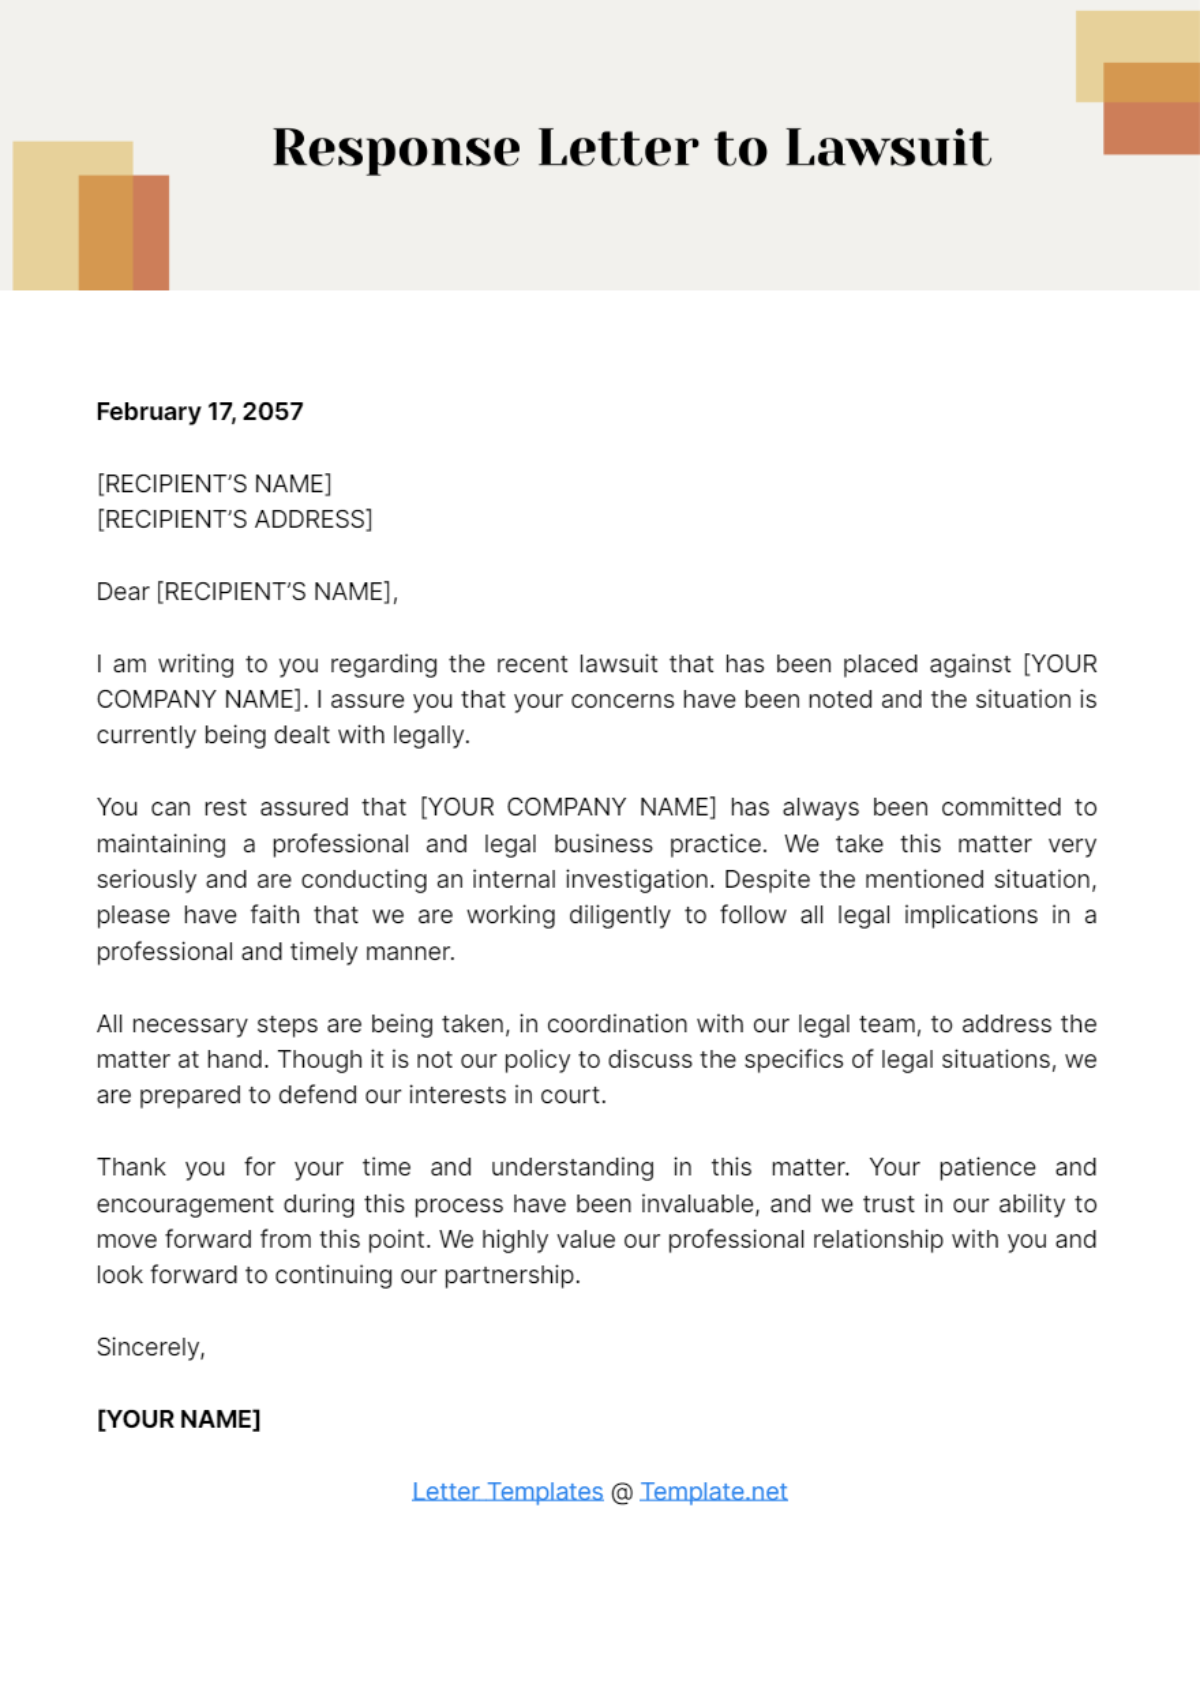 Response Letter to Lawsuit Template